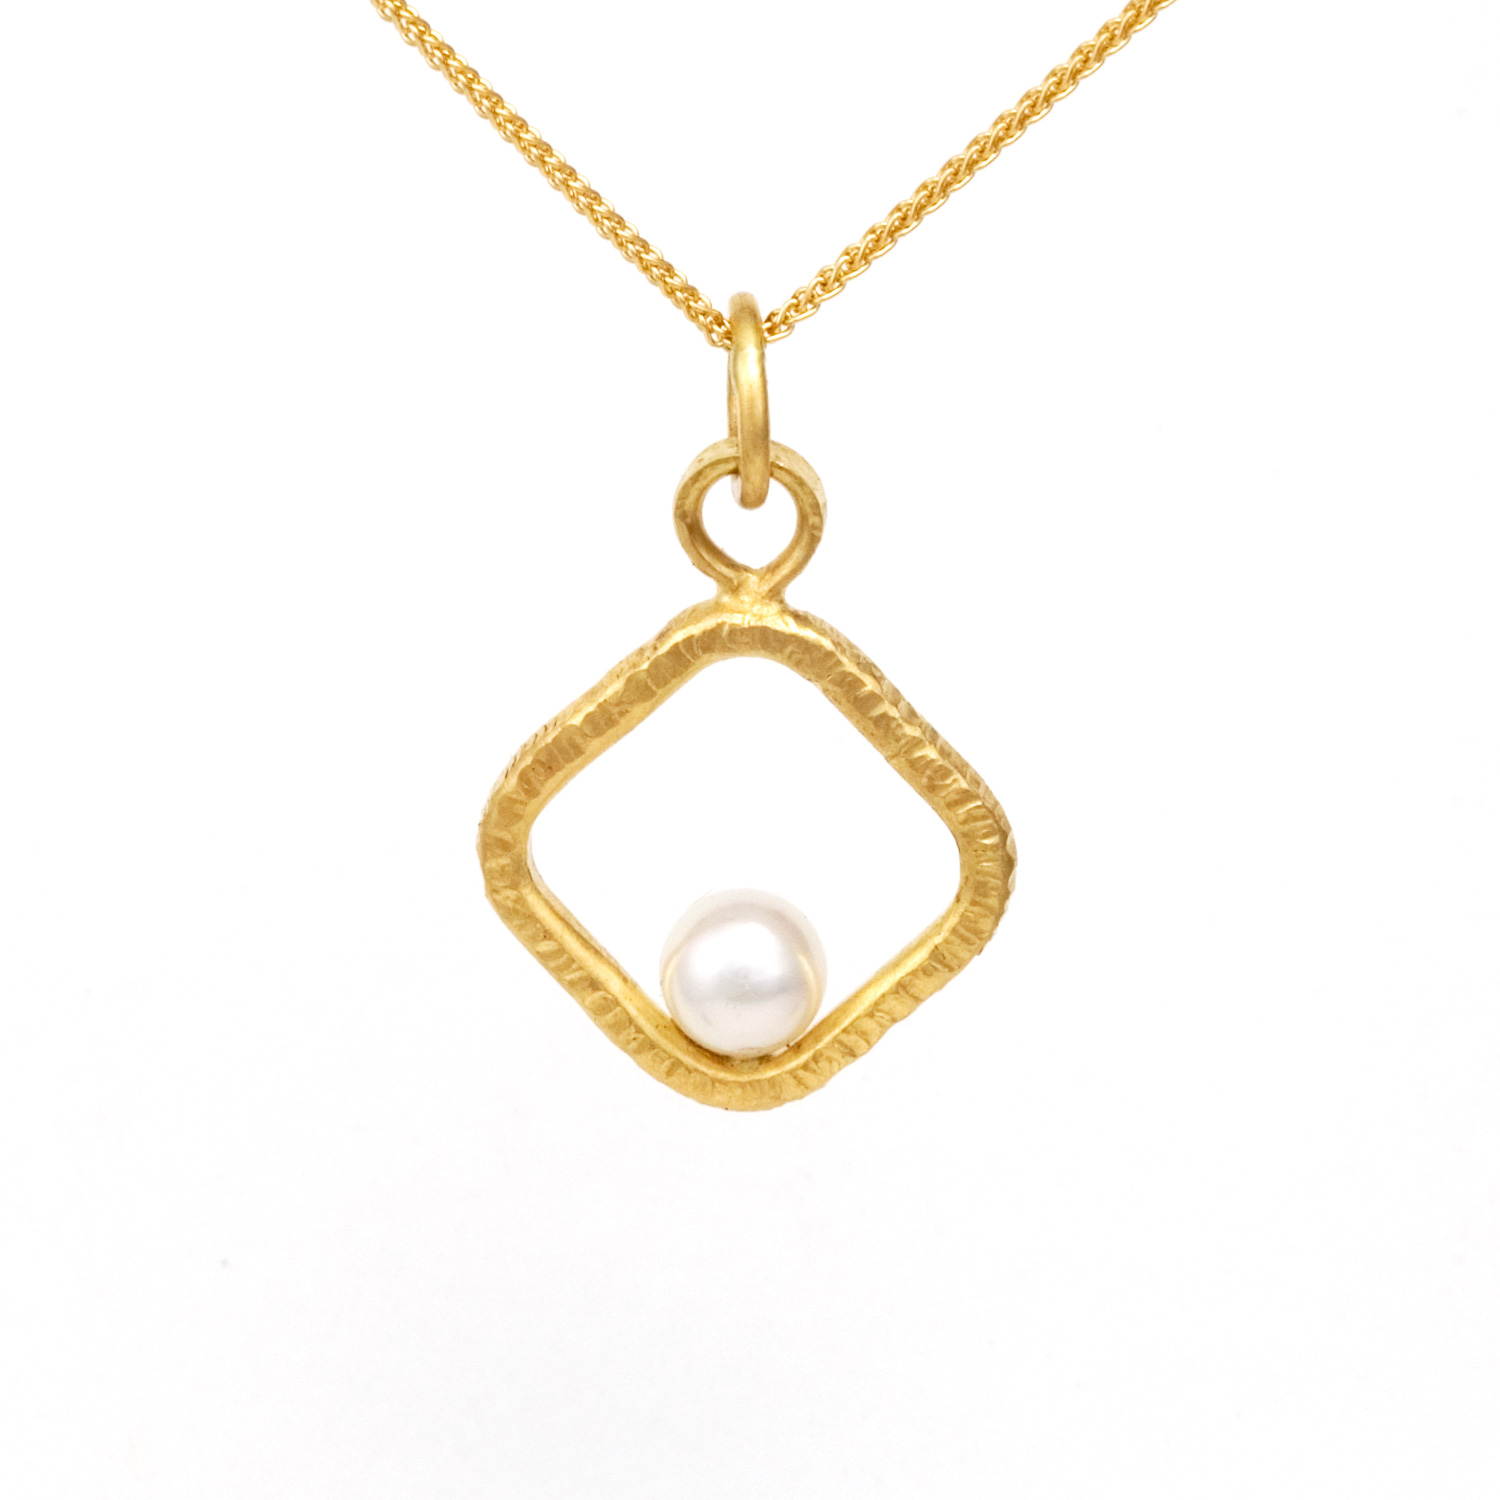 Forged Square Link Pearl Pendant in 18k gold by Tamberlaine